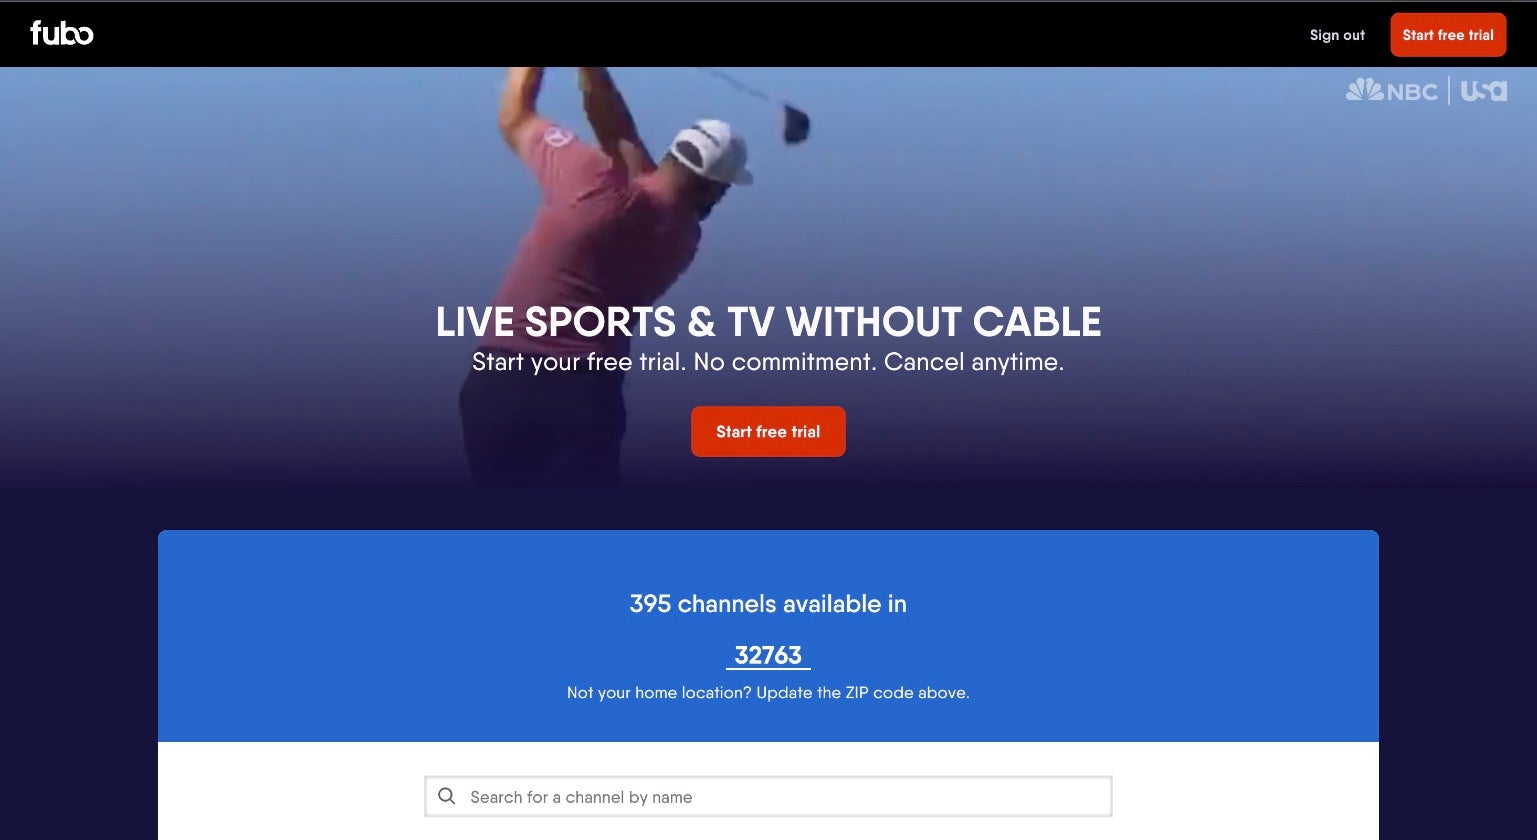 Get a two-week free trial to Fubo and stream sports throughout Thanksgiving week.